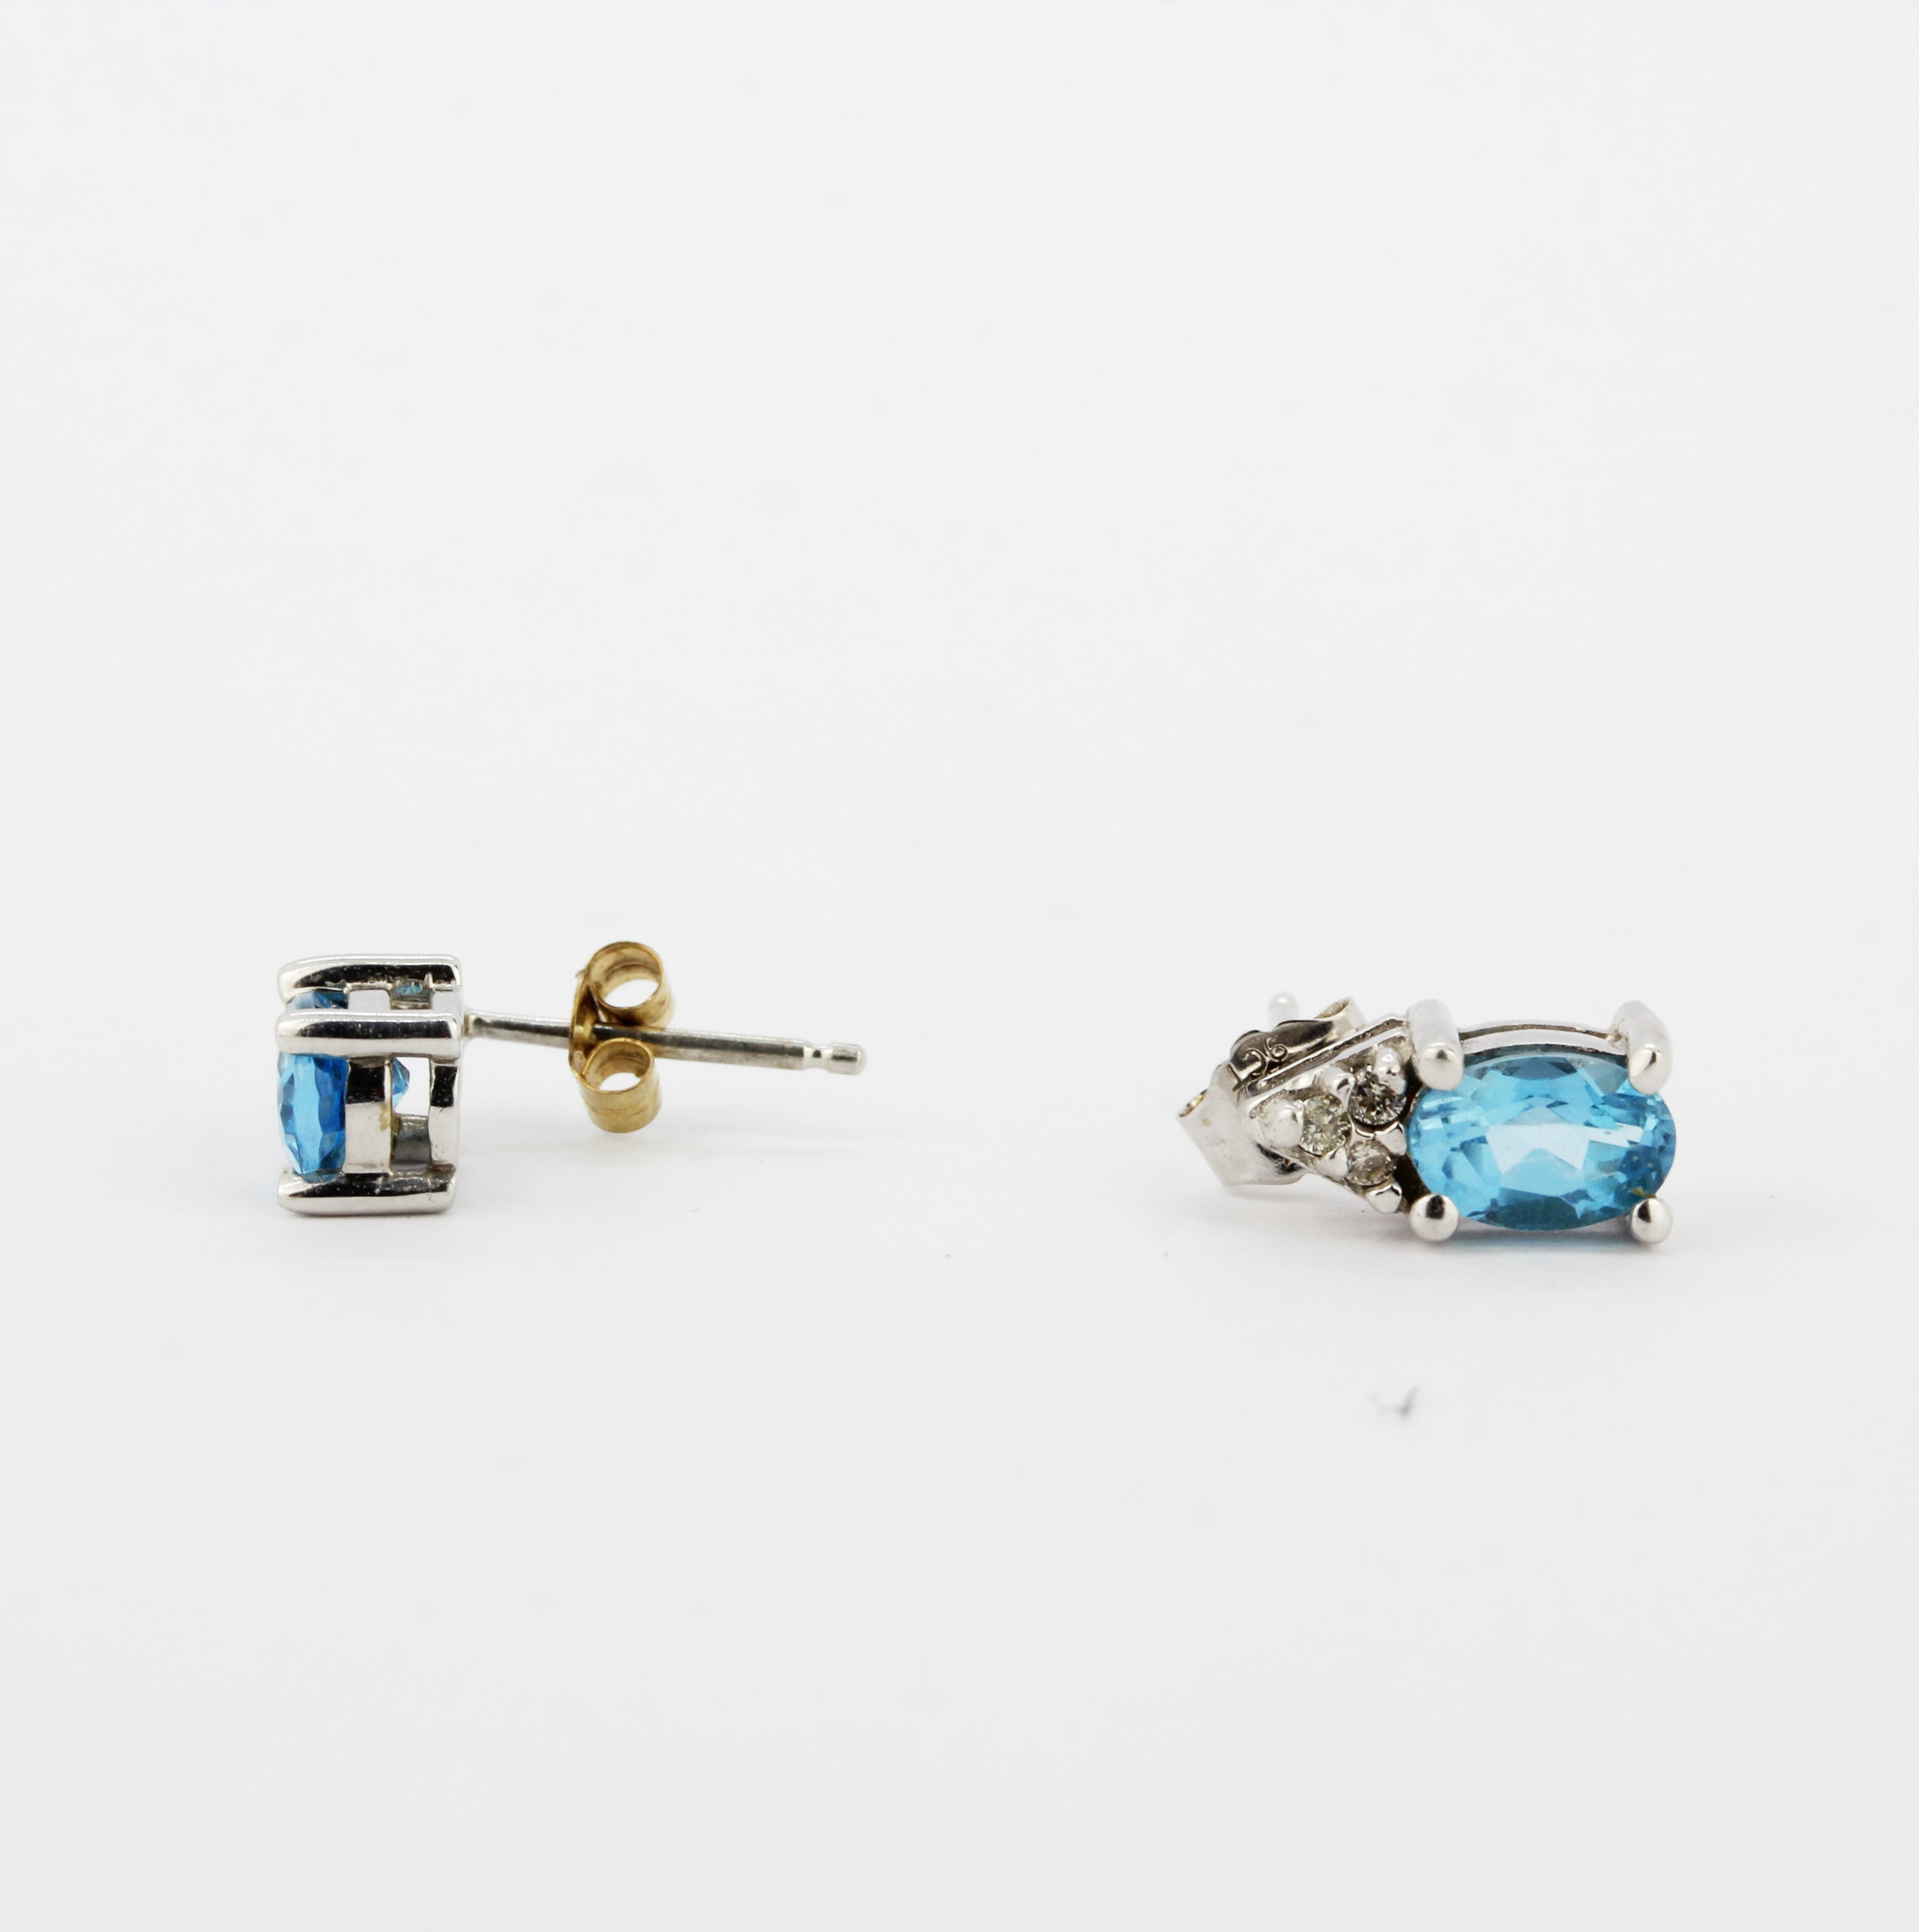 A pair of 9ct white gold stud earrings set with oval cut blue topaz and diamonds, L. 1cm. - Image 3 of 3